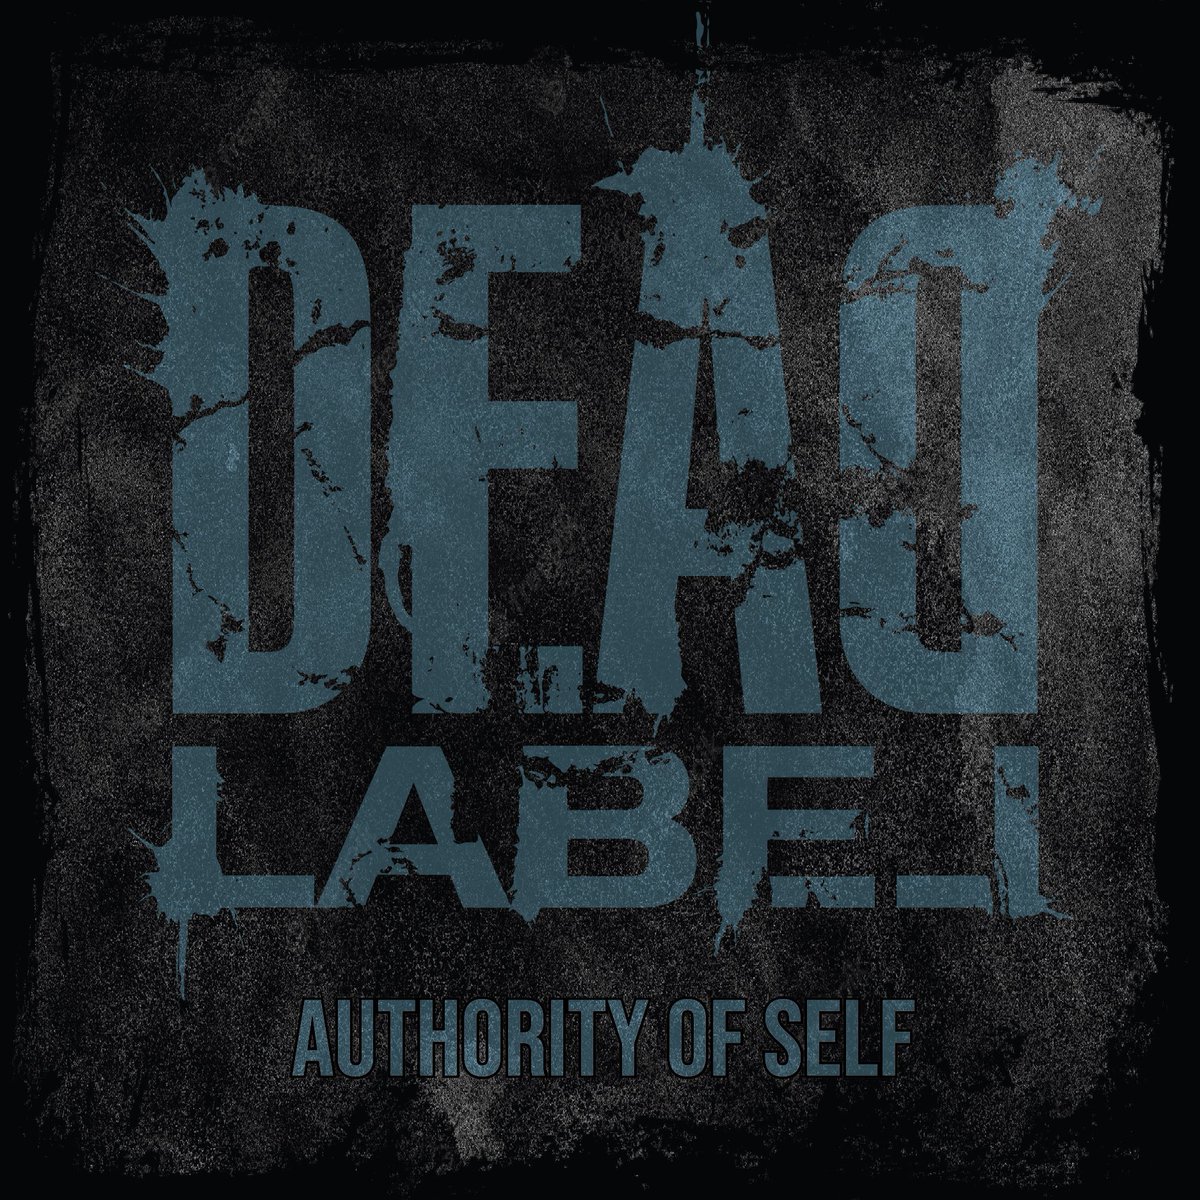 AUTHORITY OF SELF-Out now on ALL streaming platforms! Play it loud‼️

Recorded, mixed and mastered at @trackmix_studio 

#newmusic #deadlabel #newsong #heavymetal